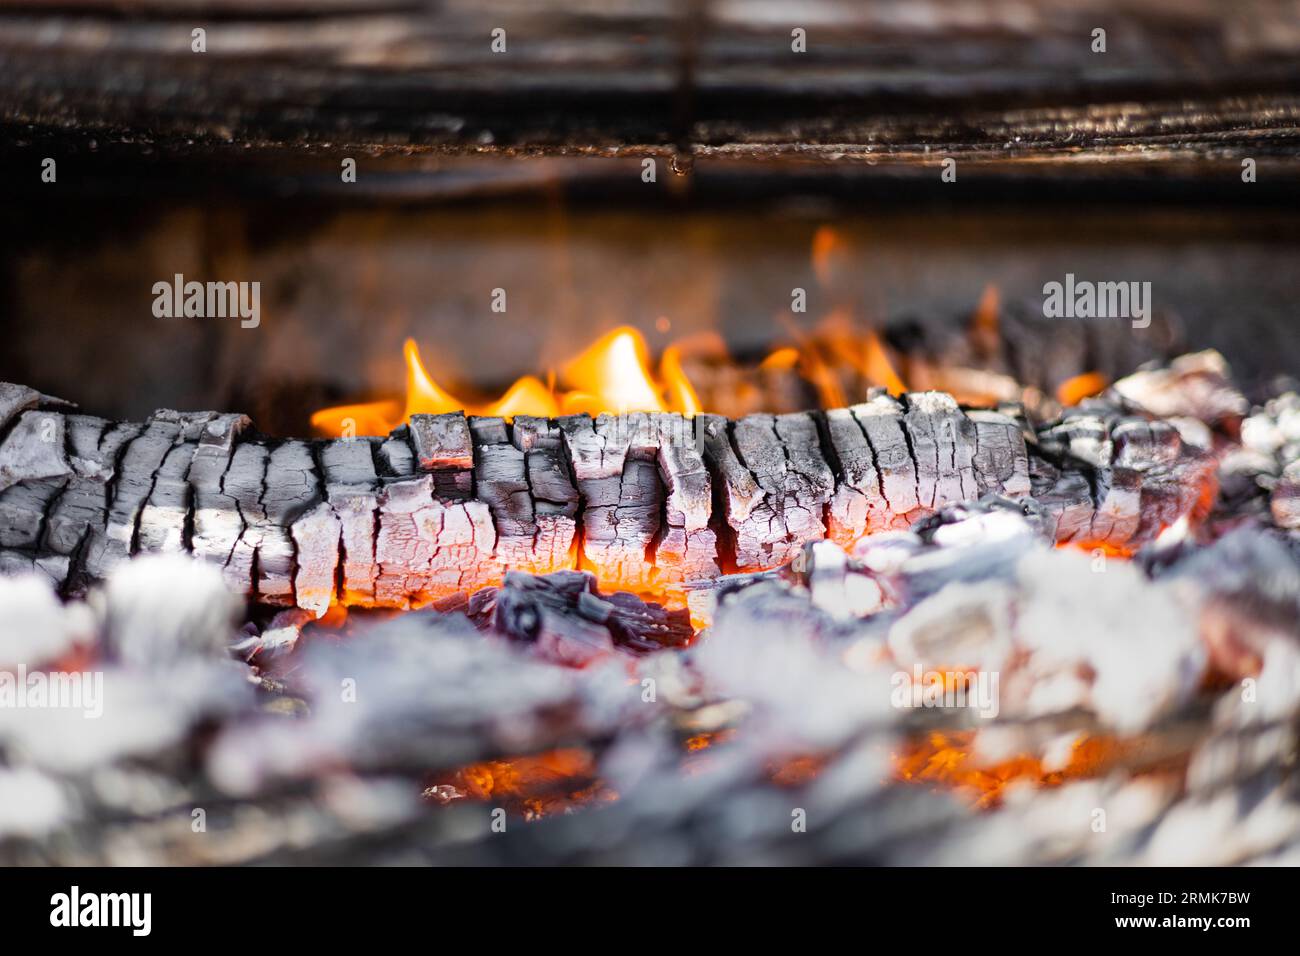 Barbecue grill pit with hot coals. Glowing and flaming charcoal briquettes for fire BBQ. Stock Photo